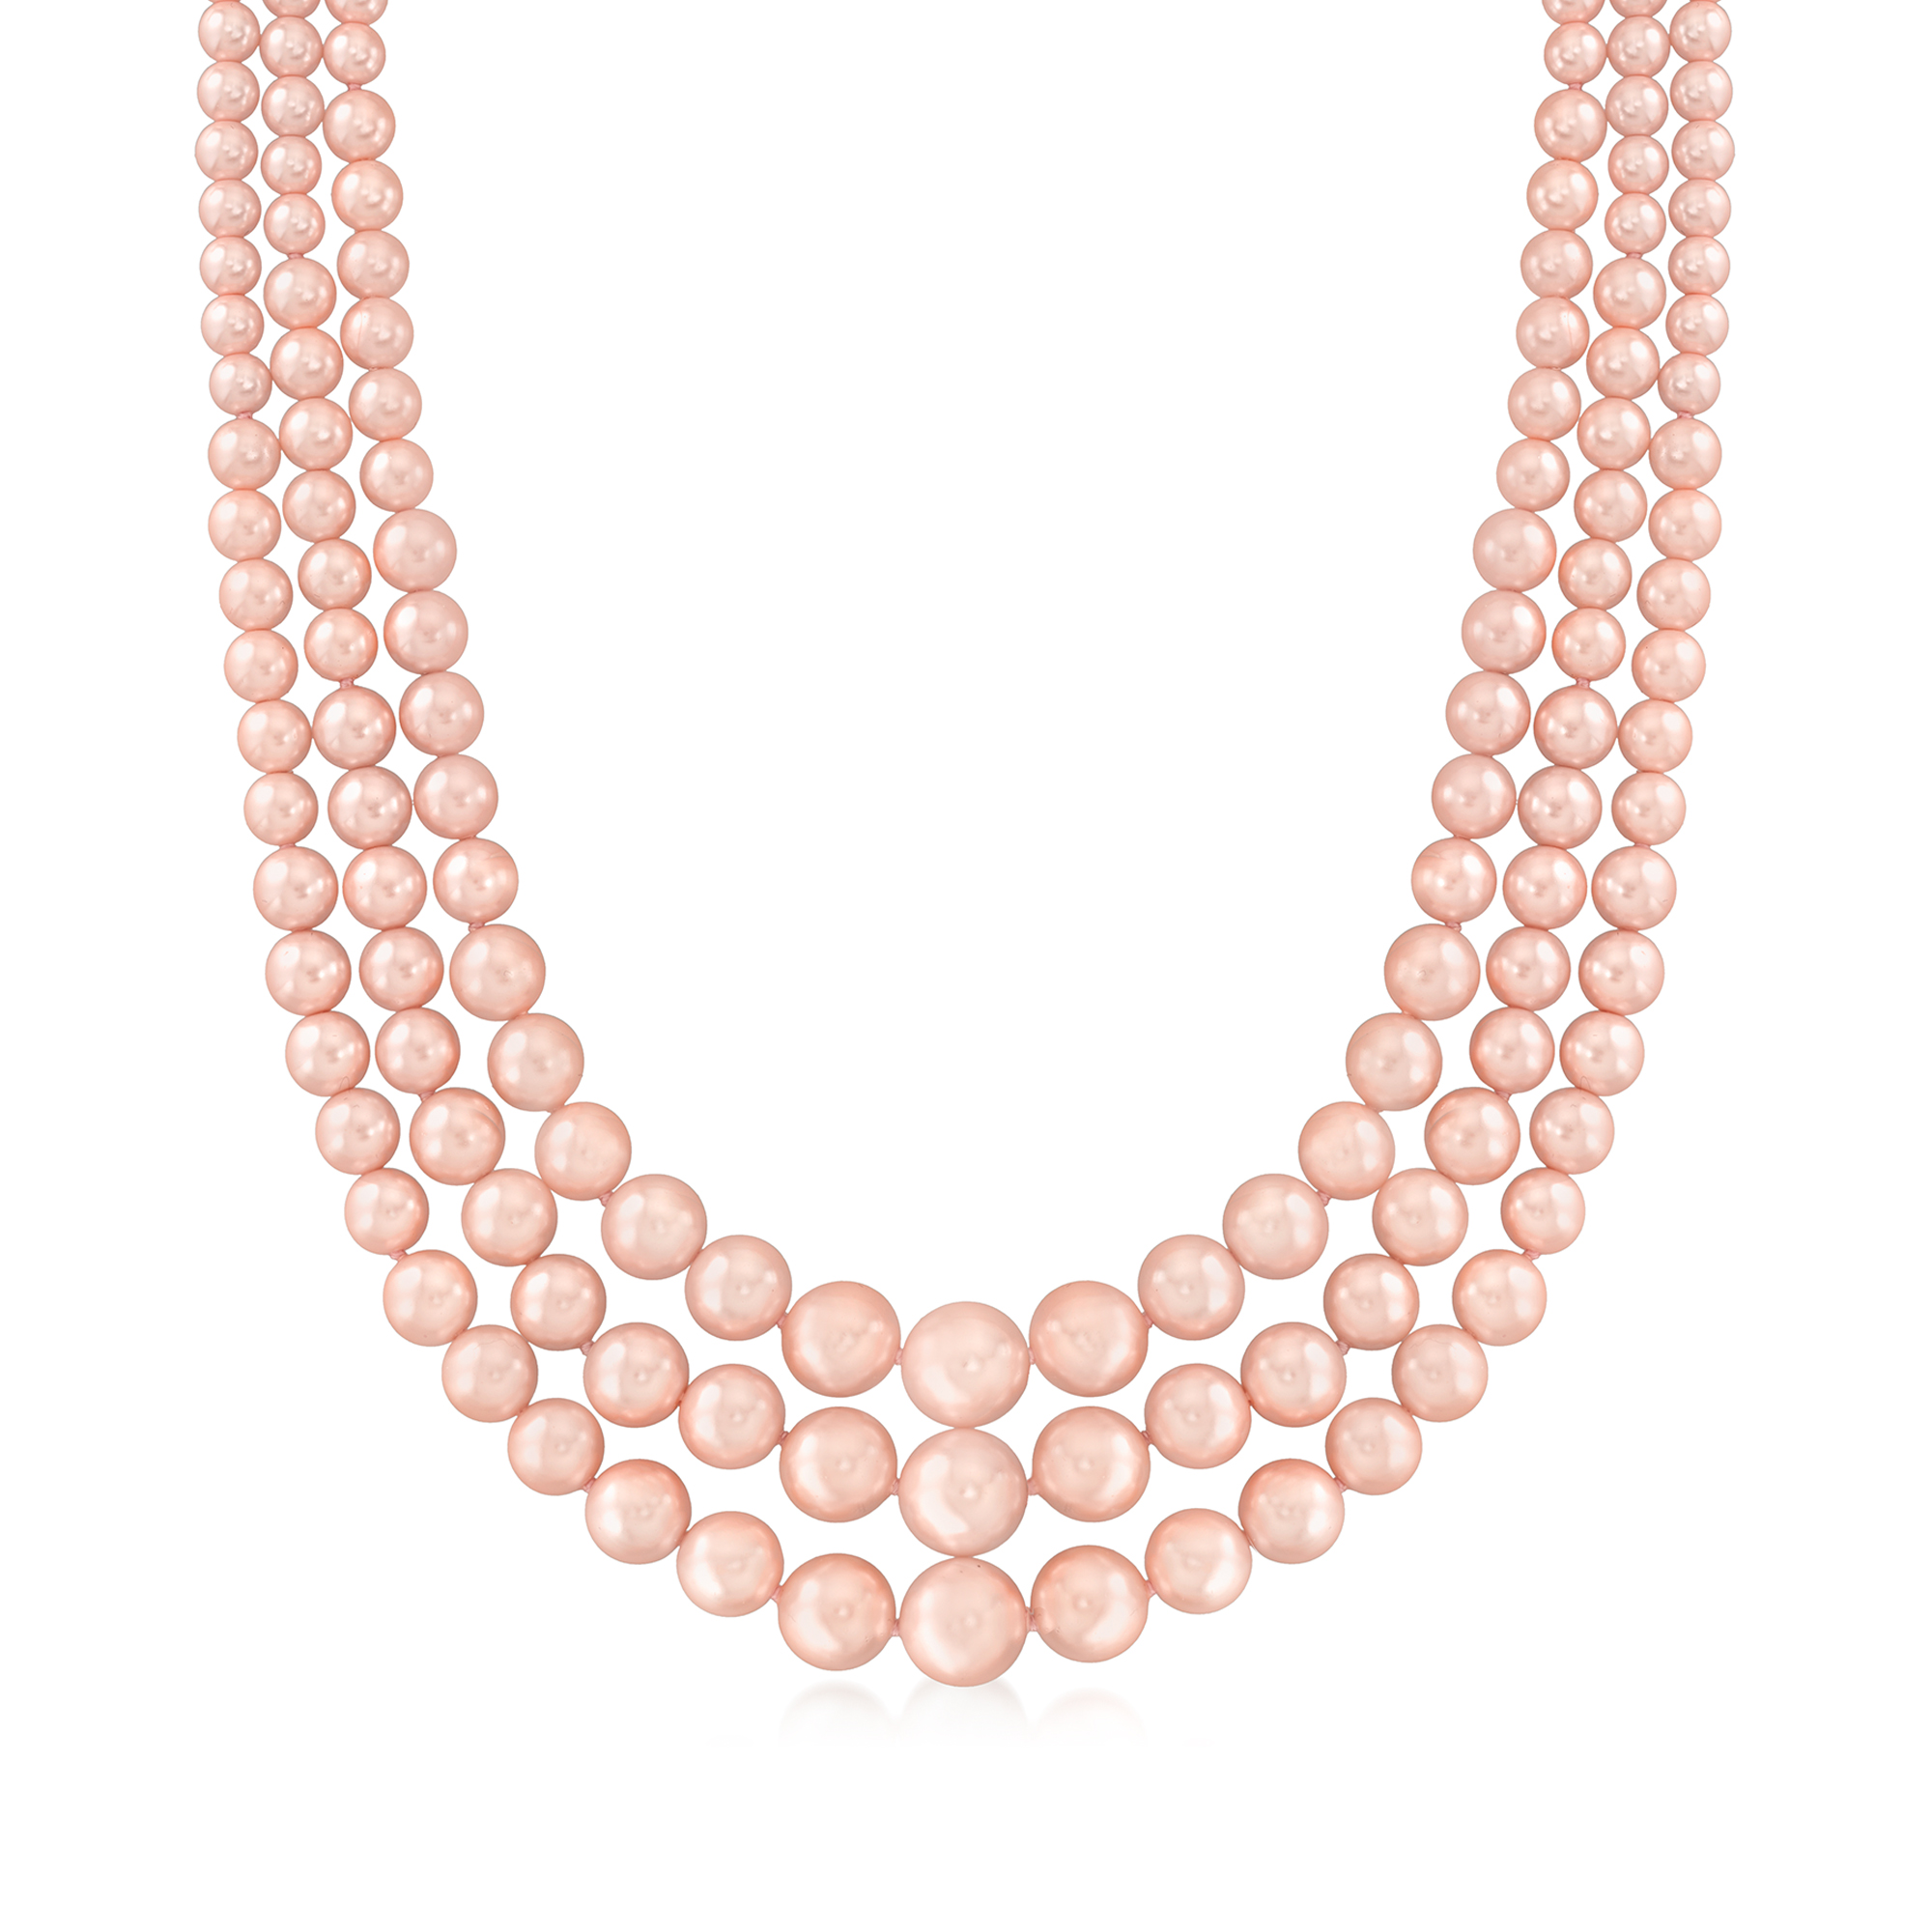 Ross-Simons - 12mm Pastel Pink Opal Bead Necklace with Sterling Silver. 20